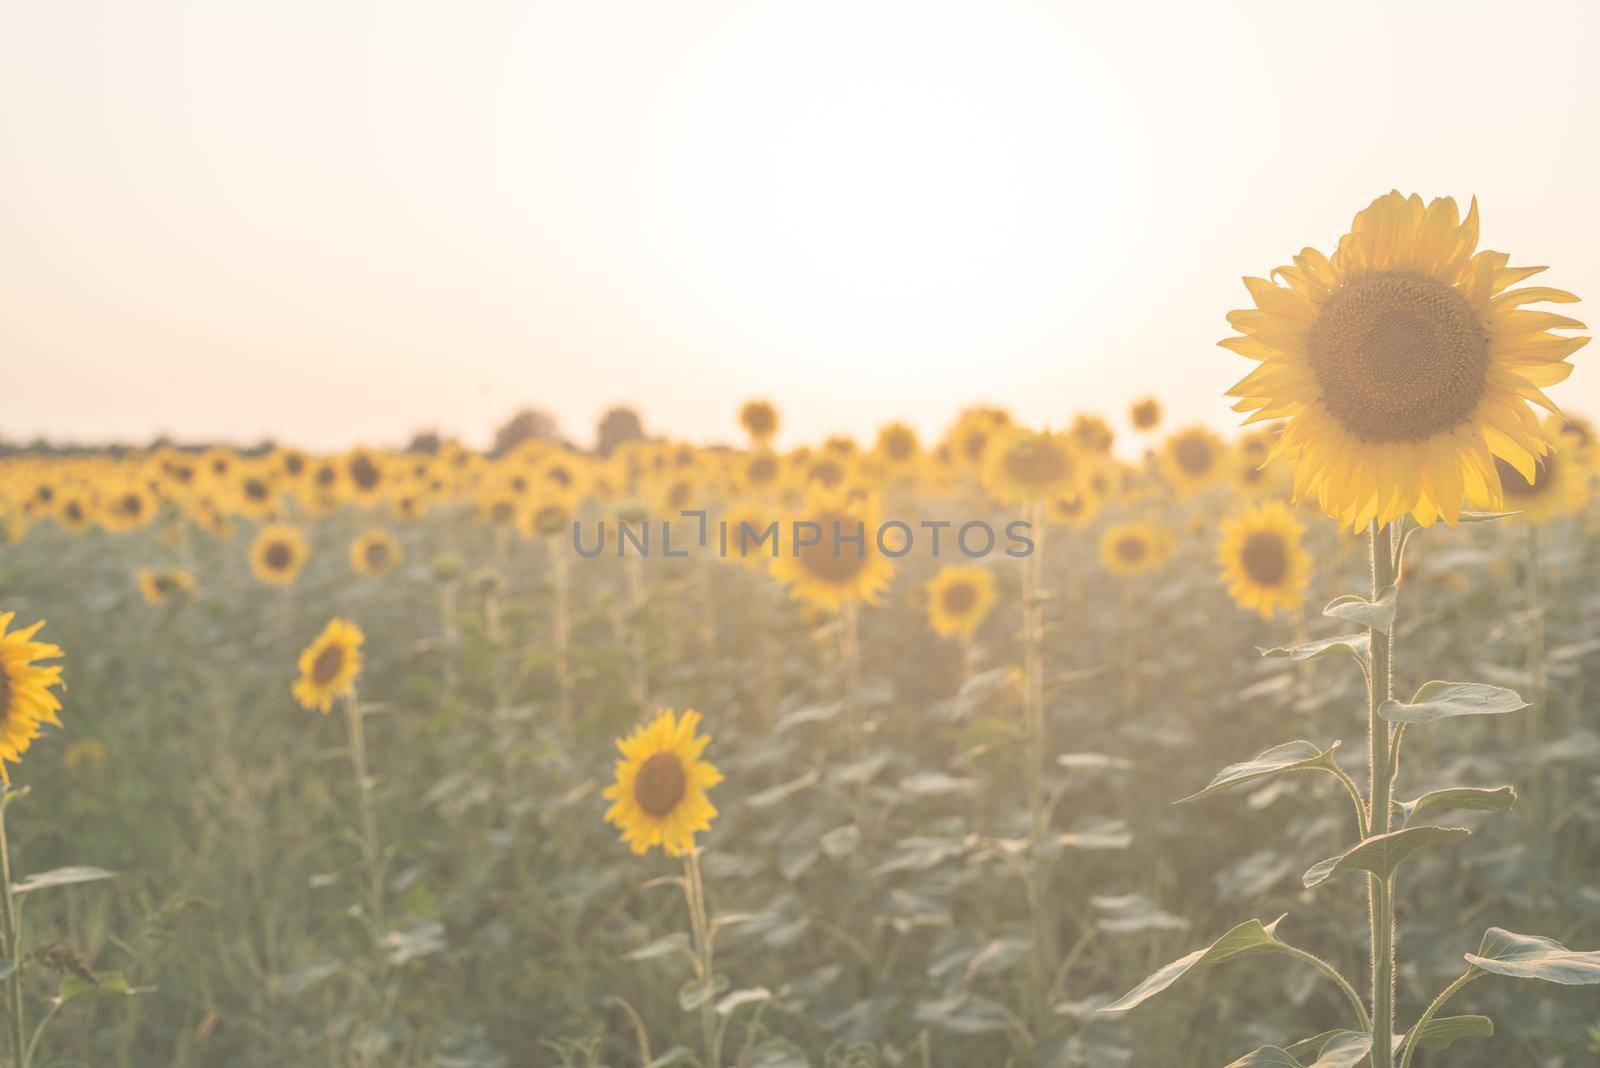 Nature background. Sunflower field in sunset, copy space